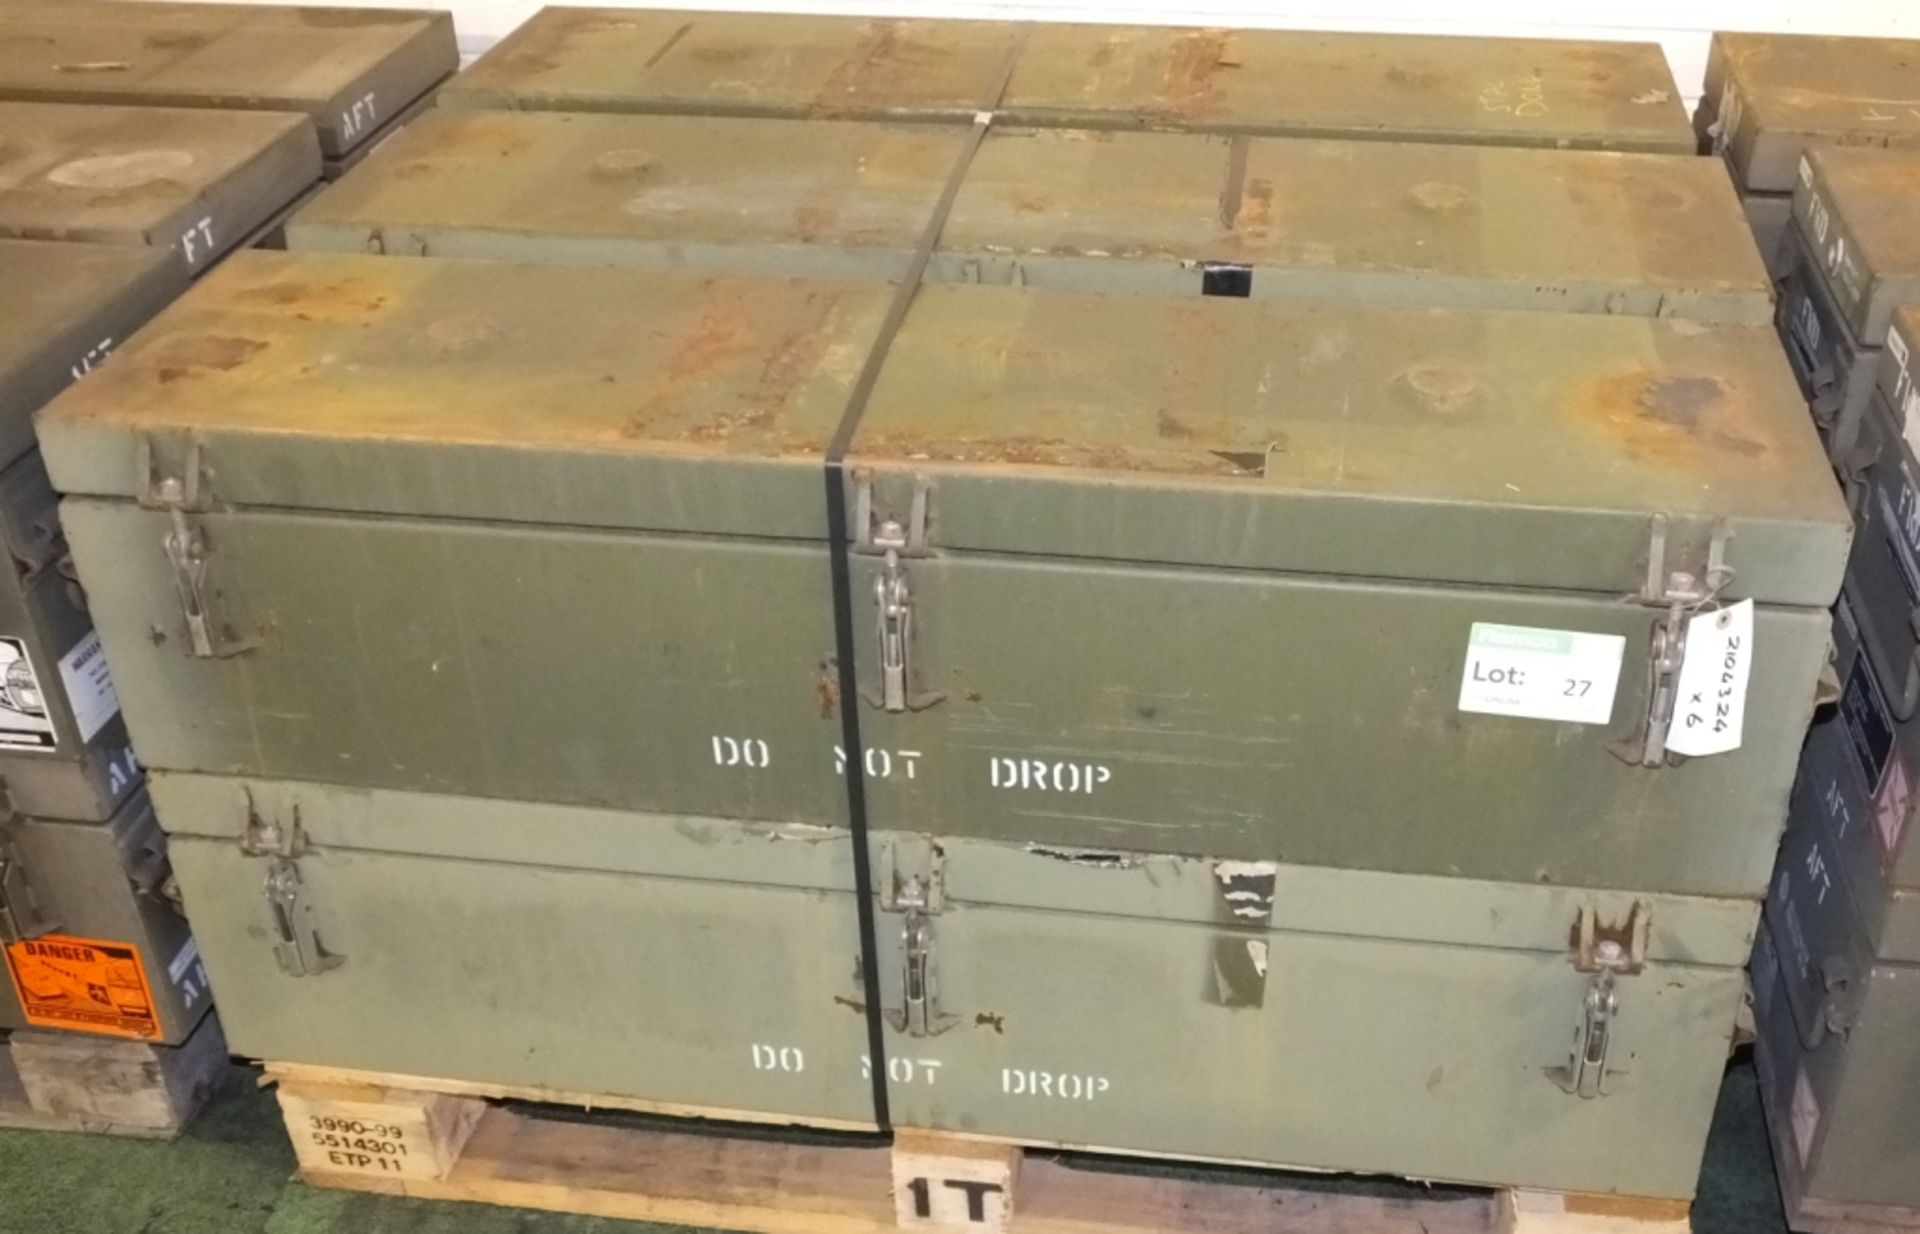 6x Gas cannister storage boxes NSN 1325-01-440-9152